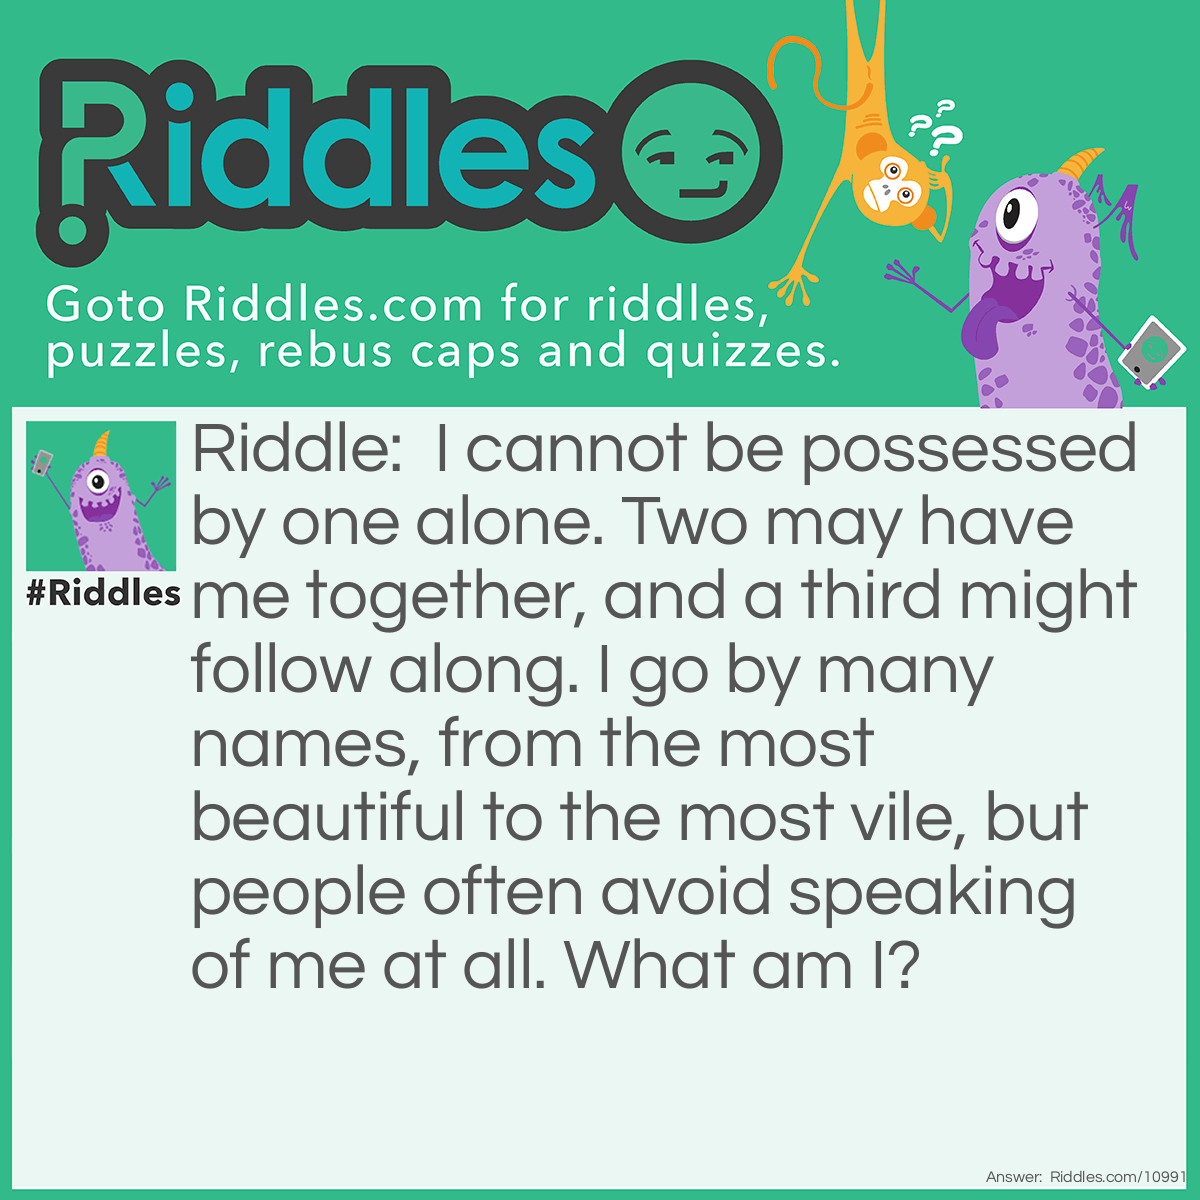 Riddle: I cannot be possessed by one alone. Two may have me together, and a third might follow along. I go by many names, from the most beautiful to the most vile, but people often avoid speaking of me at all. What am I? Answer: Sex.